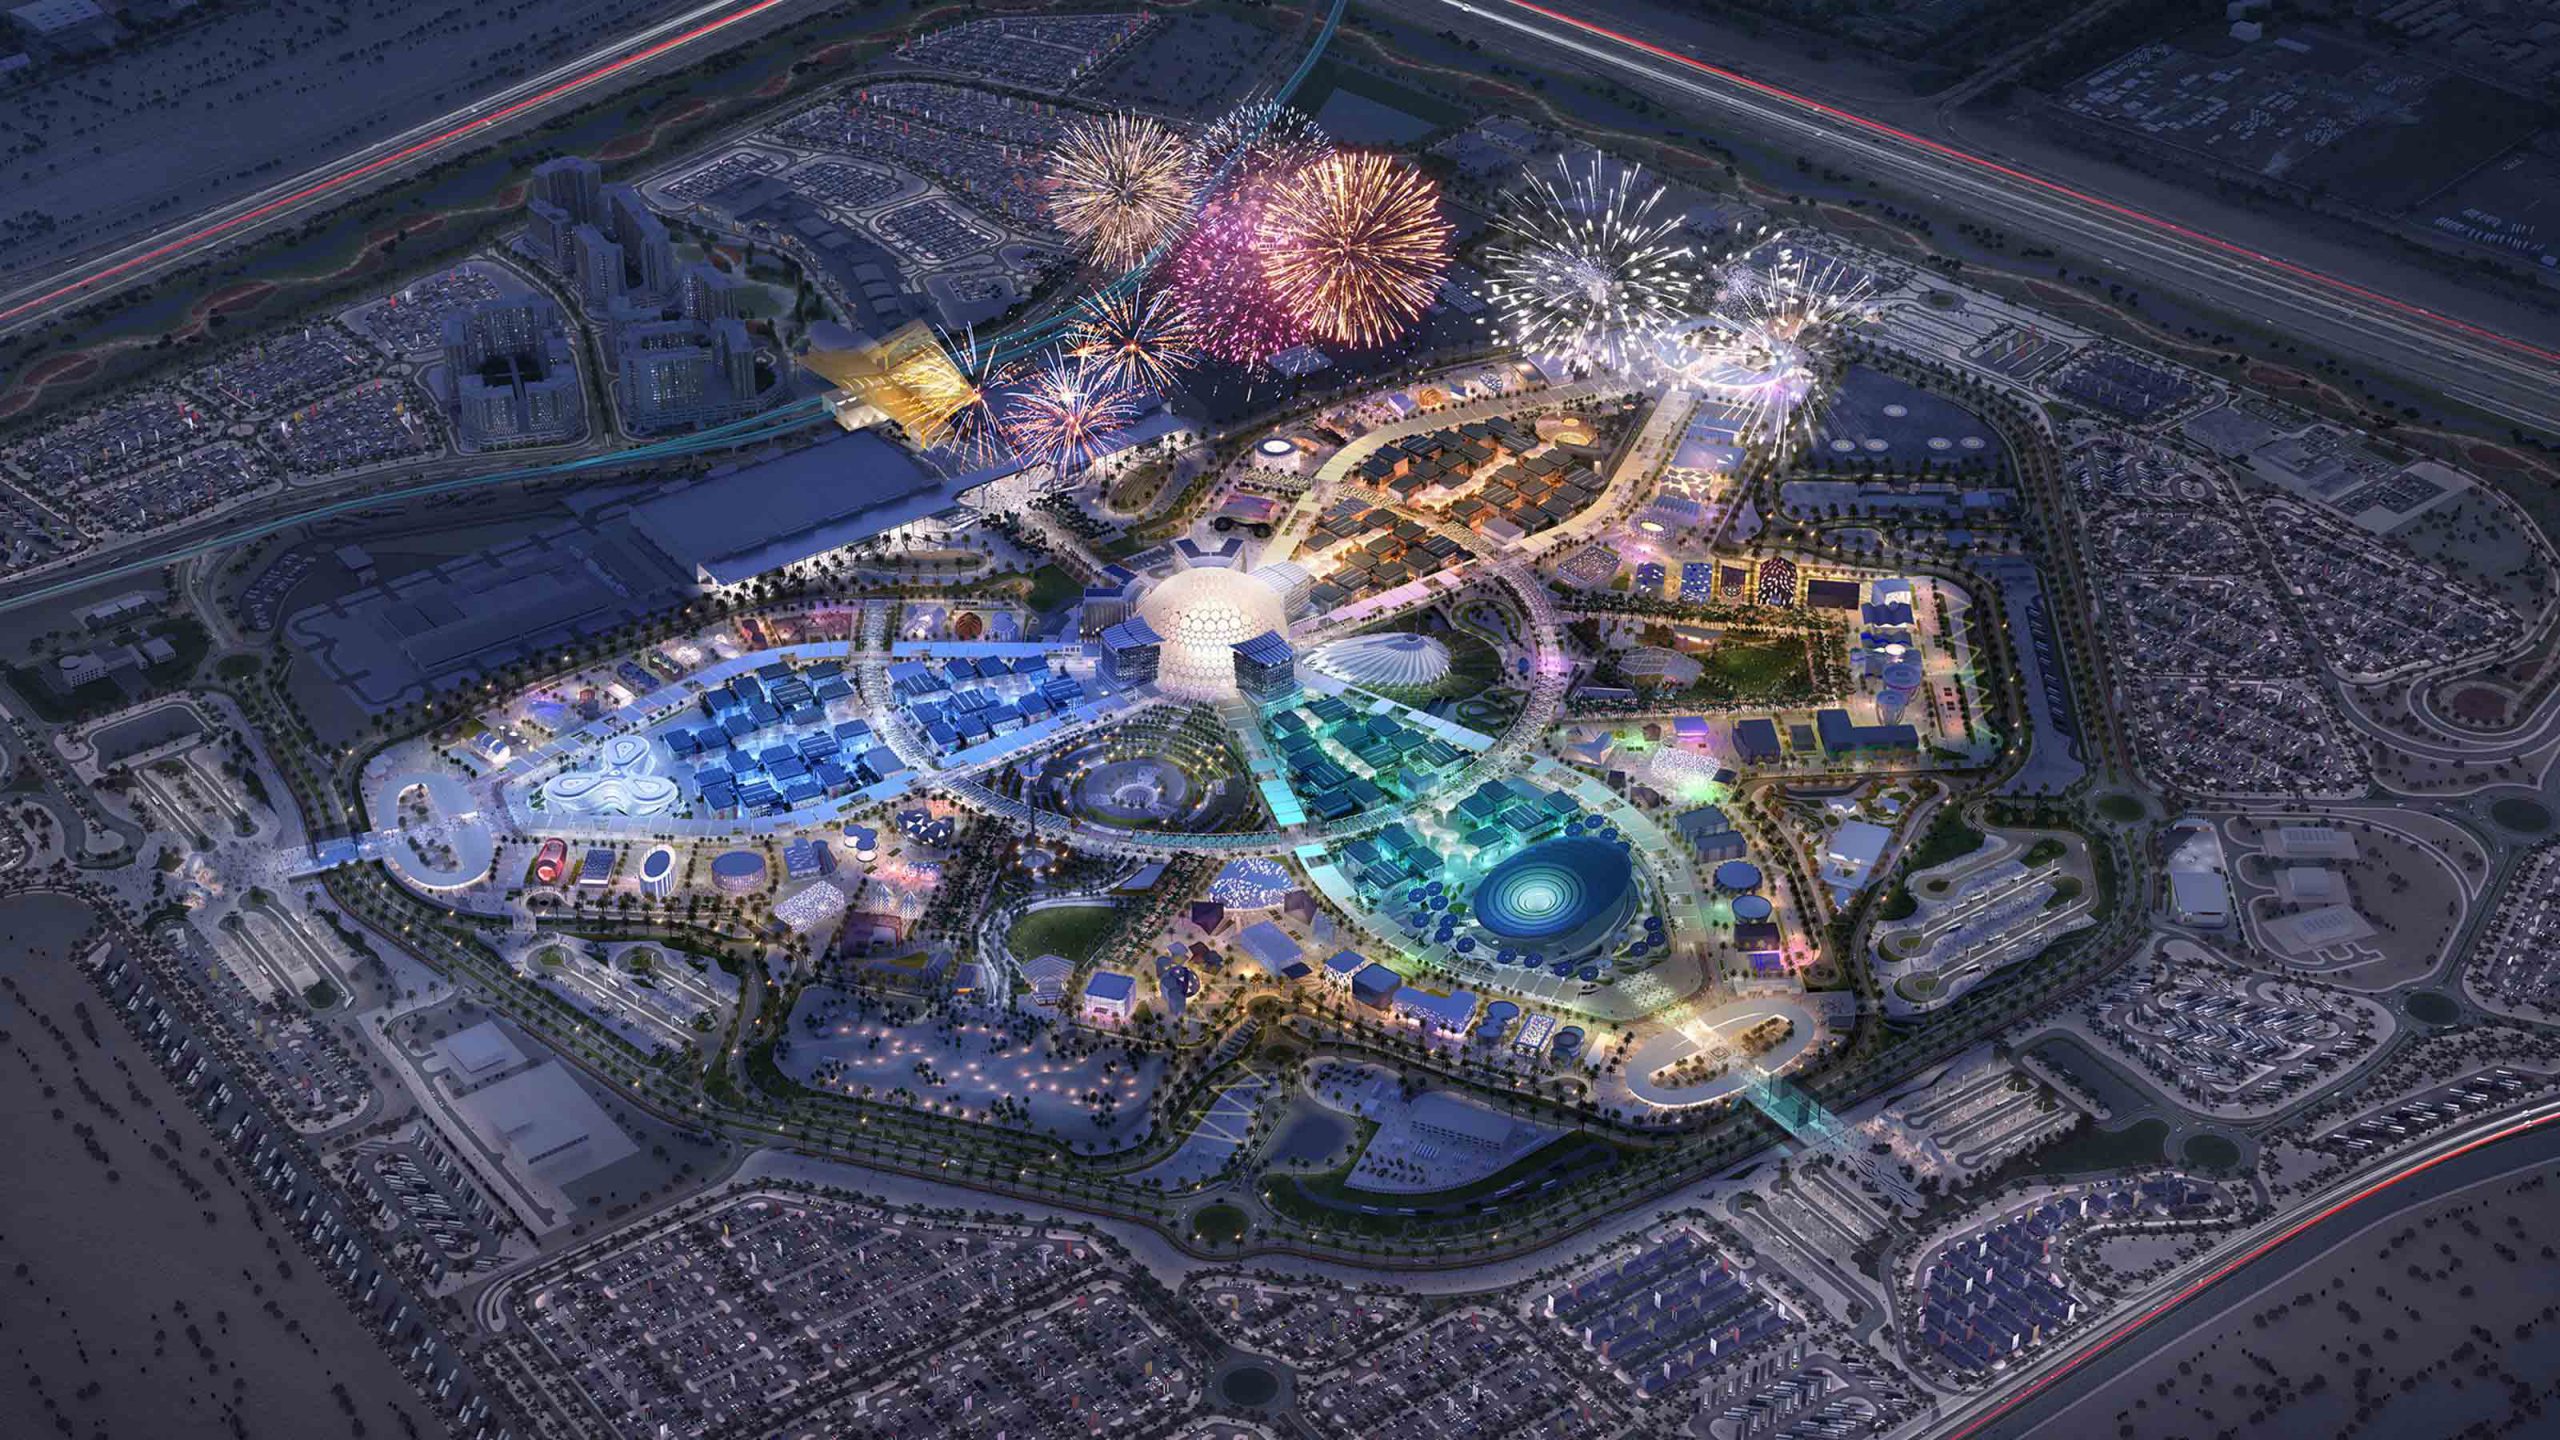 All you need to know about Dubai Expo 2020